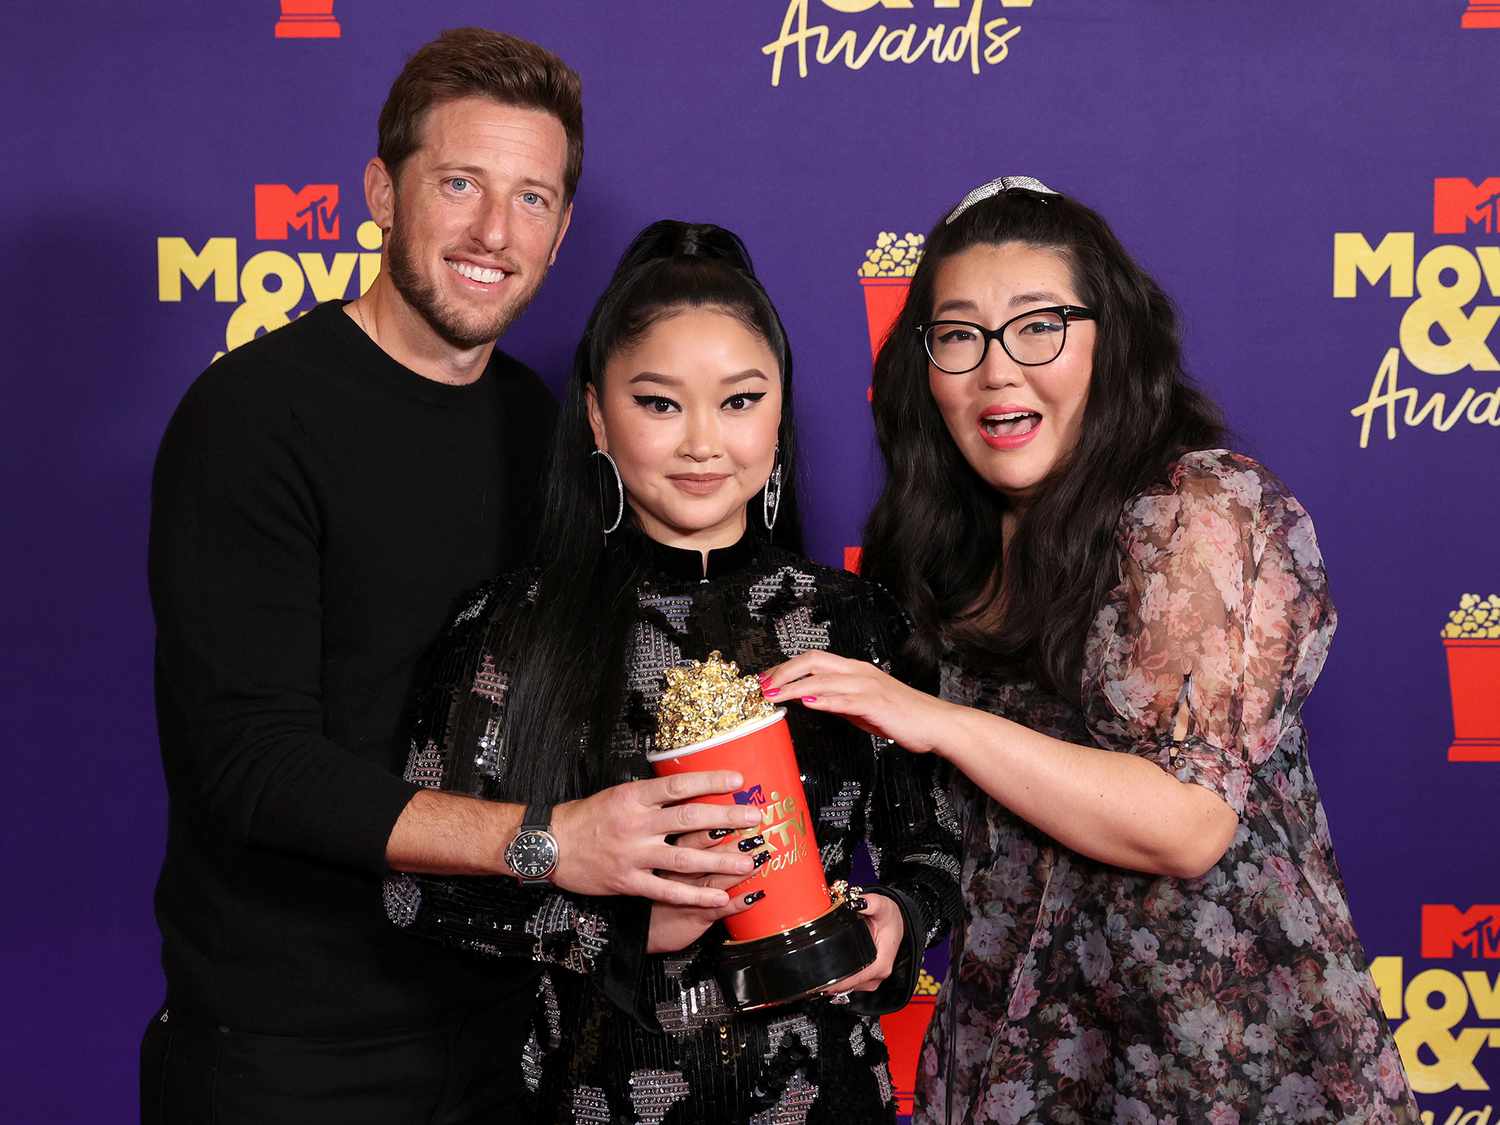 Matt Kaplan, Lana Condor, and Jenny Han pose with the Best Movie award for 'To All the Boys: Always and Forever' backstage during the 2021 MTV Movie & TV Awards